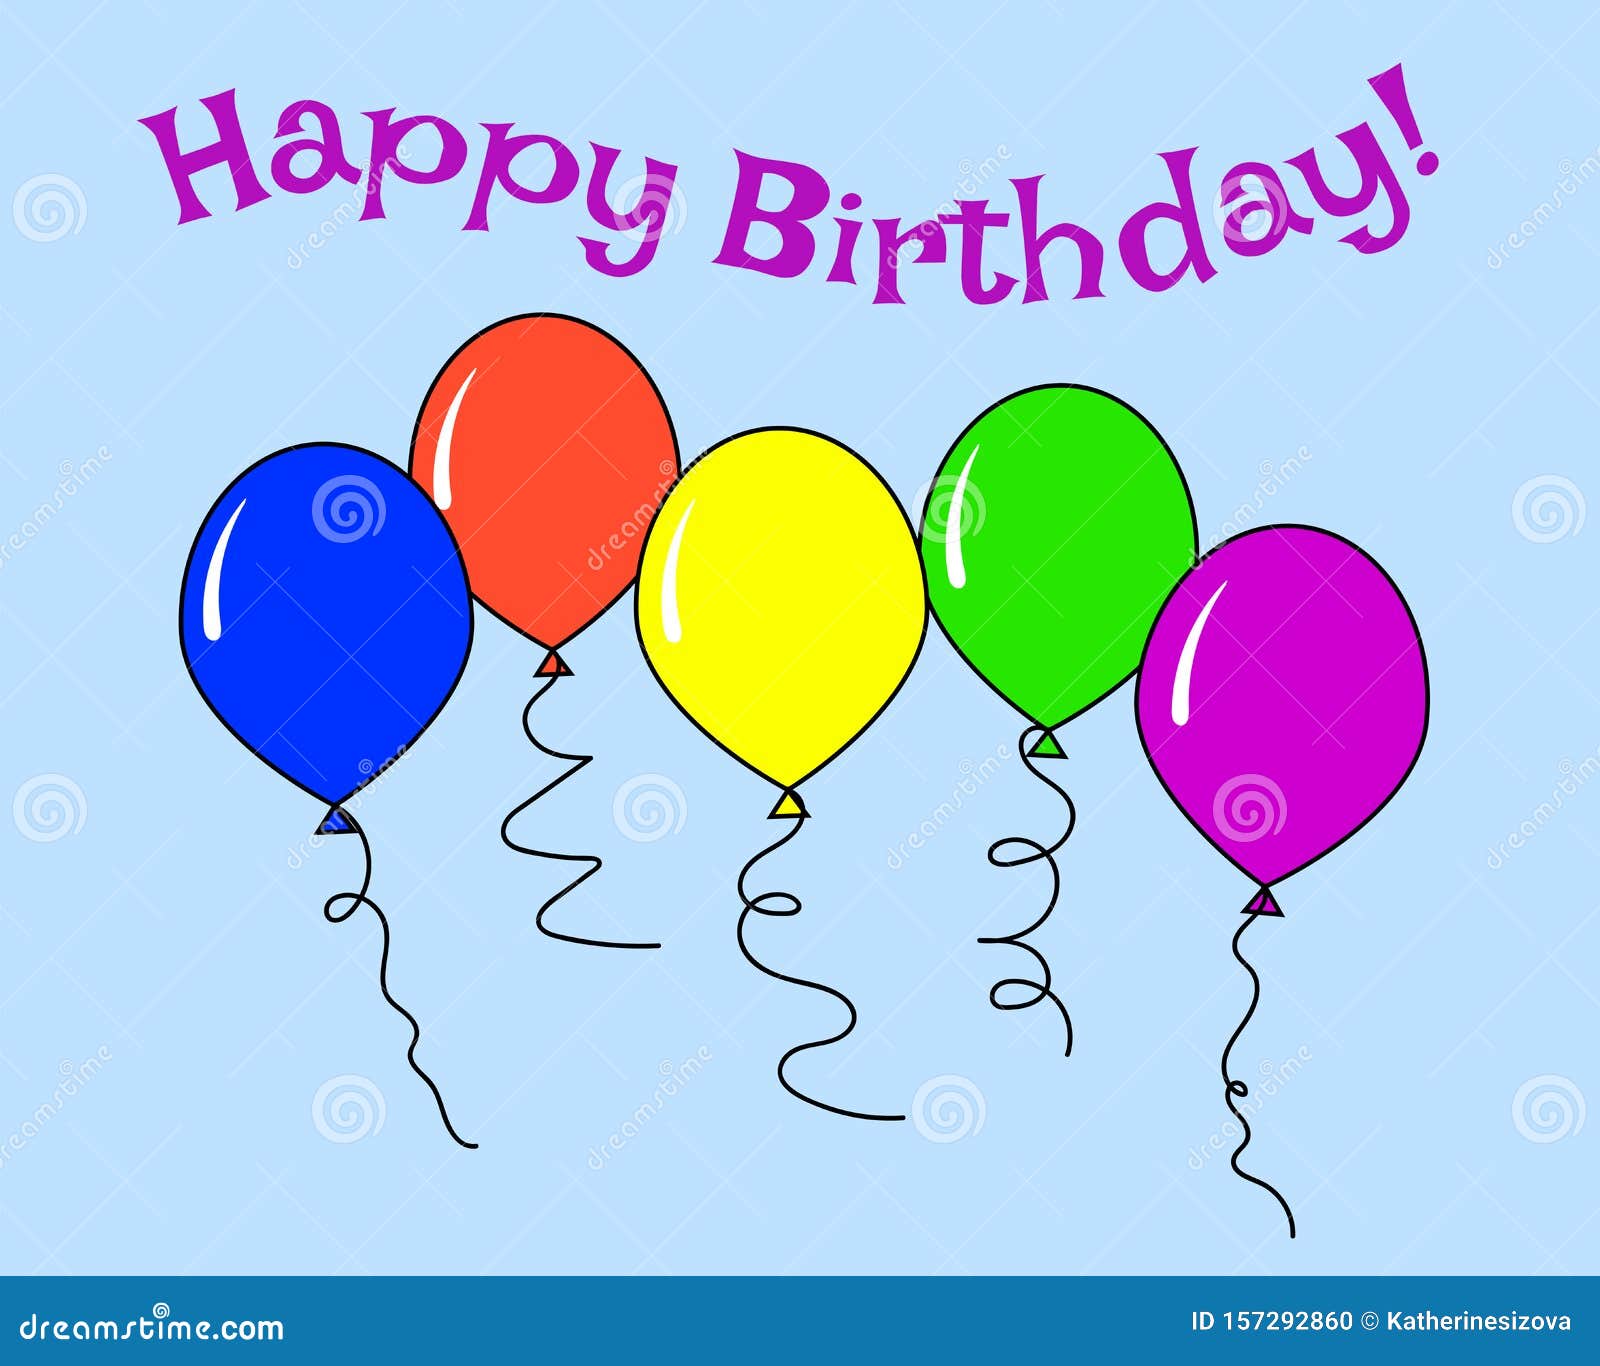 Colorful Happy Birthday Balloons Simple Drawing Vector